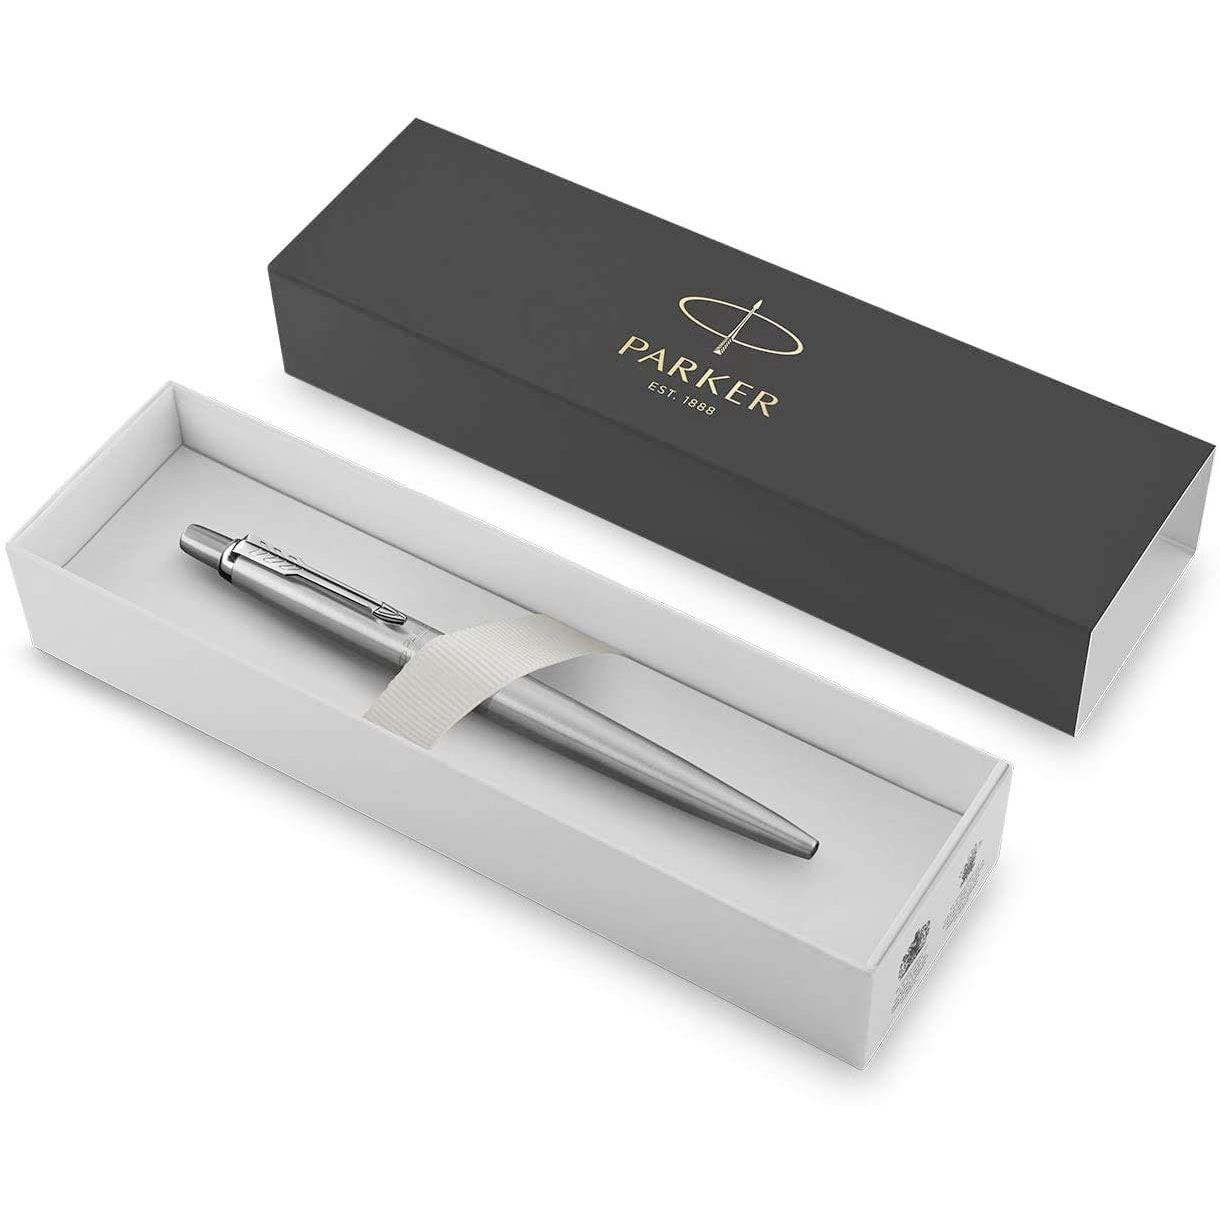 Amazon：Parker Jotter Stainless Steel CT Ballpoint Pen with Gift Box只卖$13.66